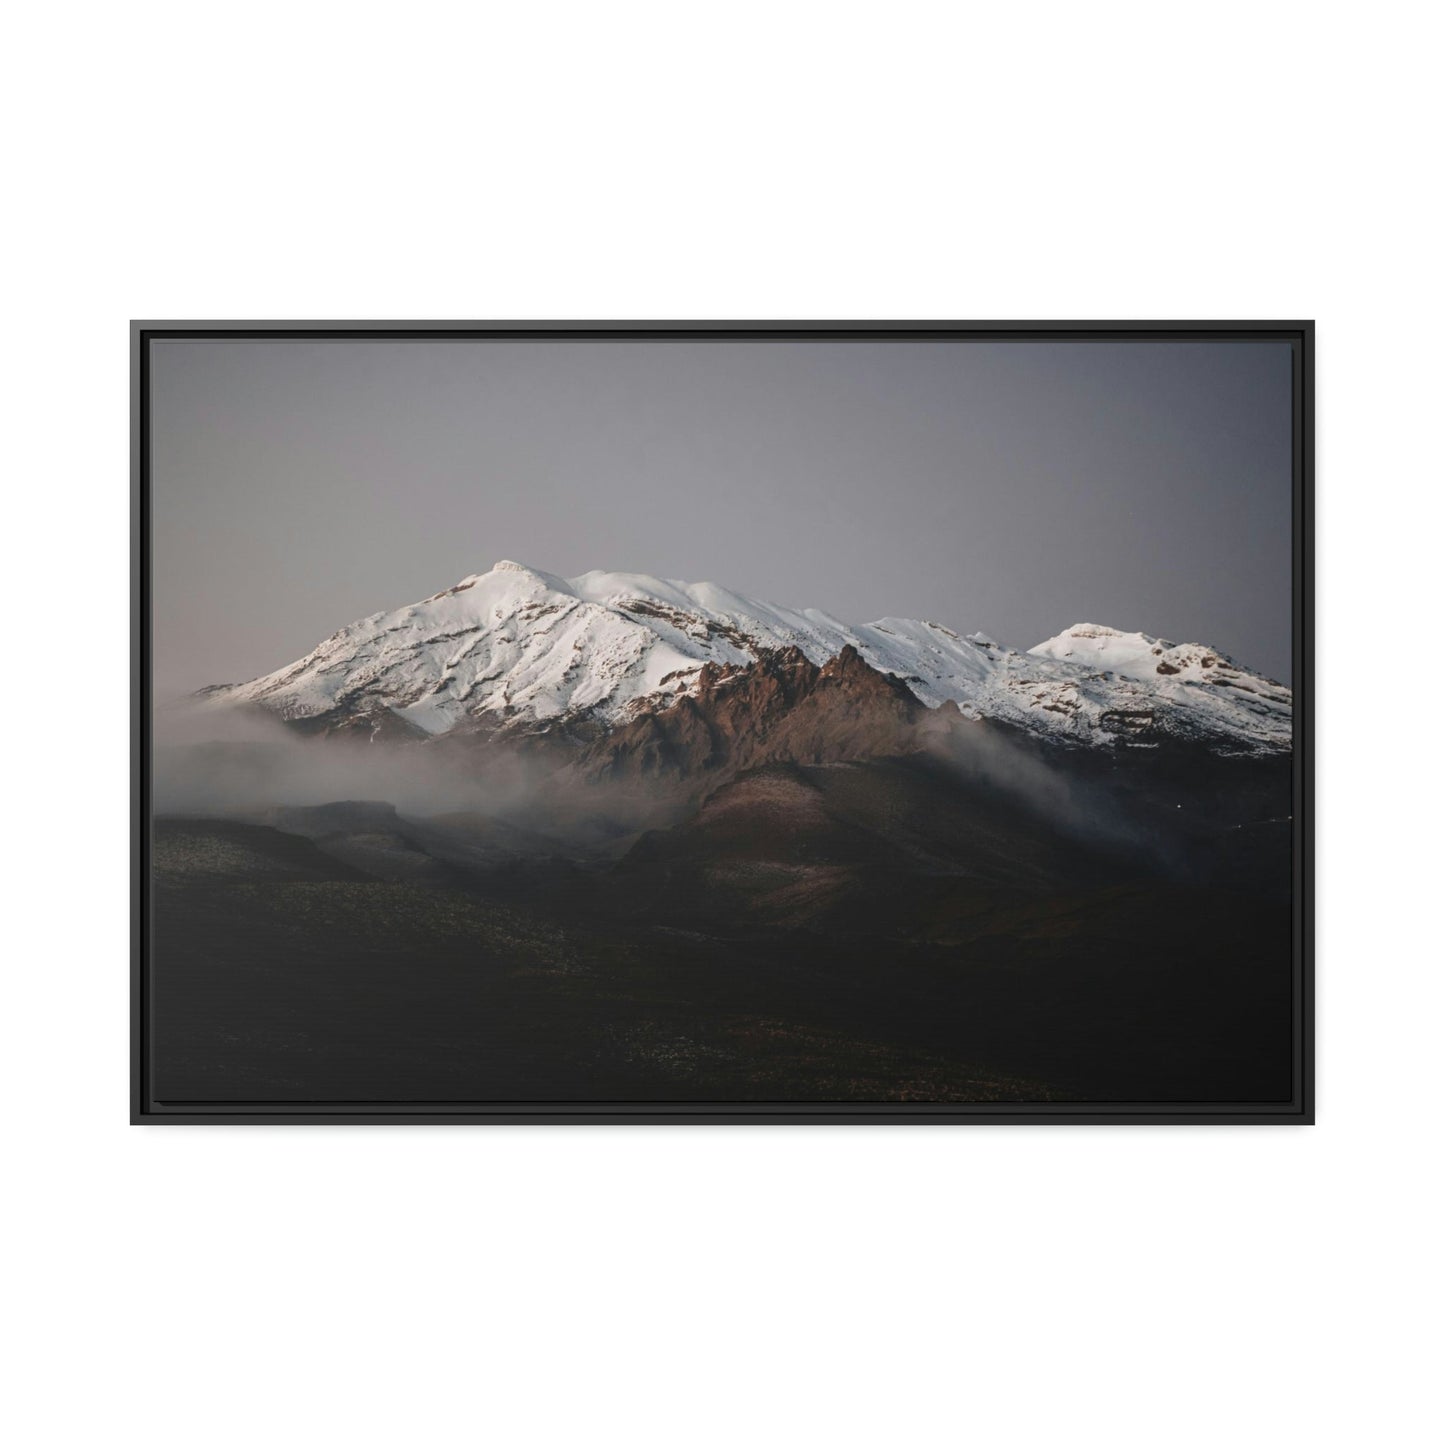 The Magnificence of Mountains: A Panoramic View on Canvas